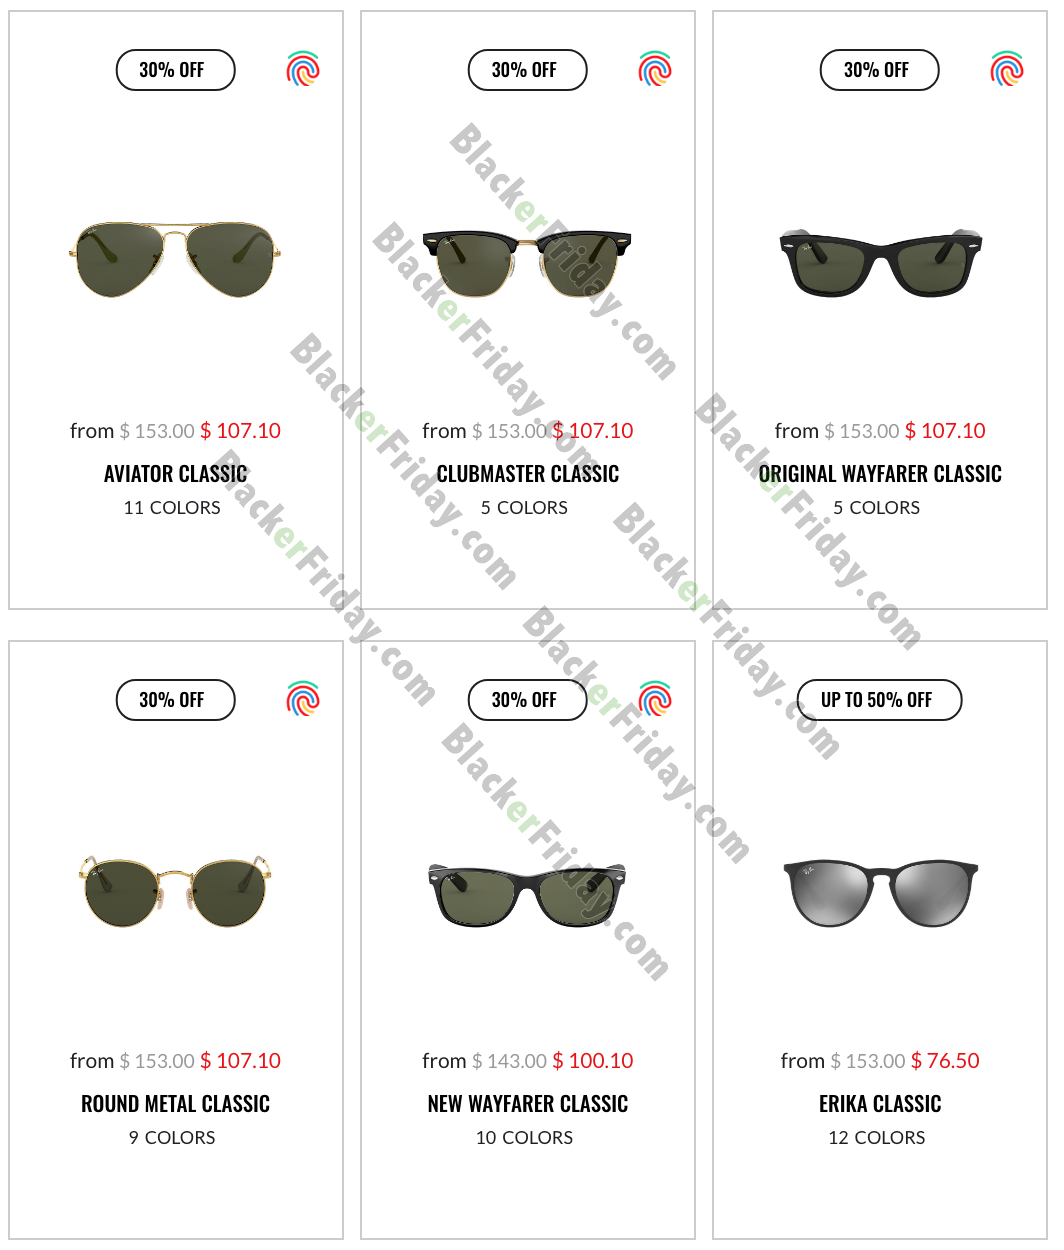 professional clockwise Uncertain Ray Ban Coupon May 2019 Hot Sale, 55% OFF | www.visitmontanejos.com